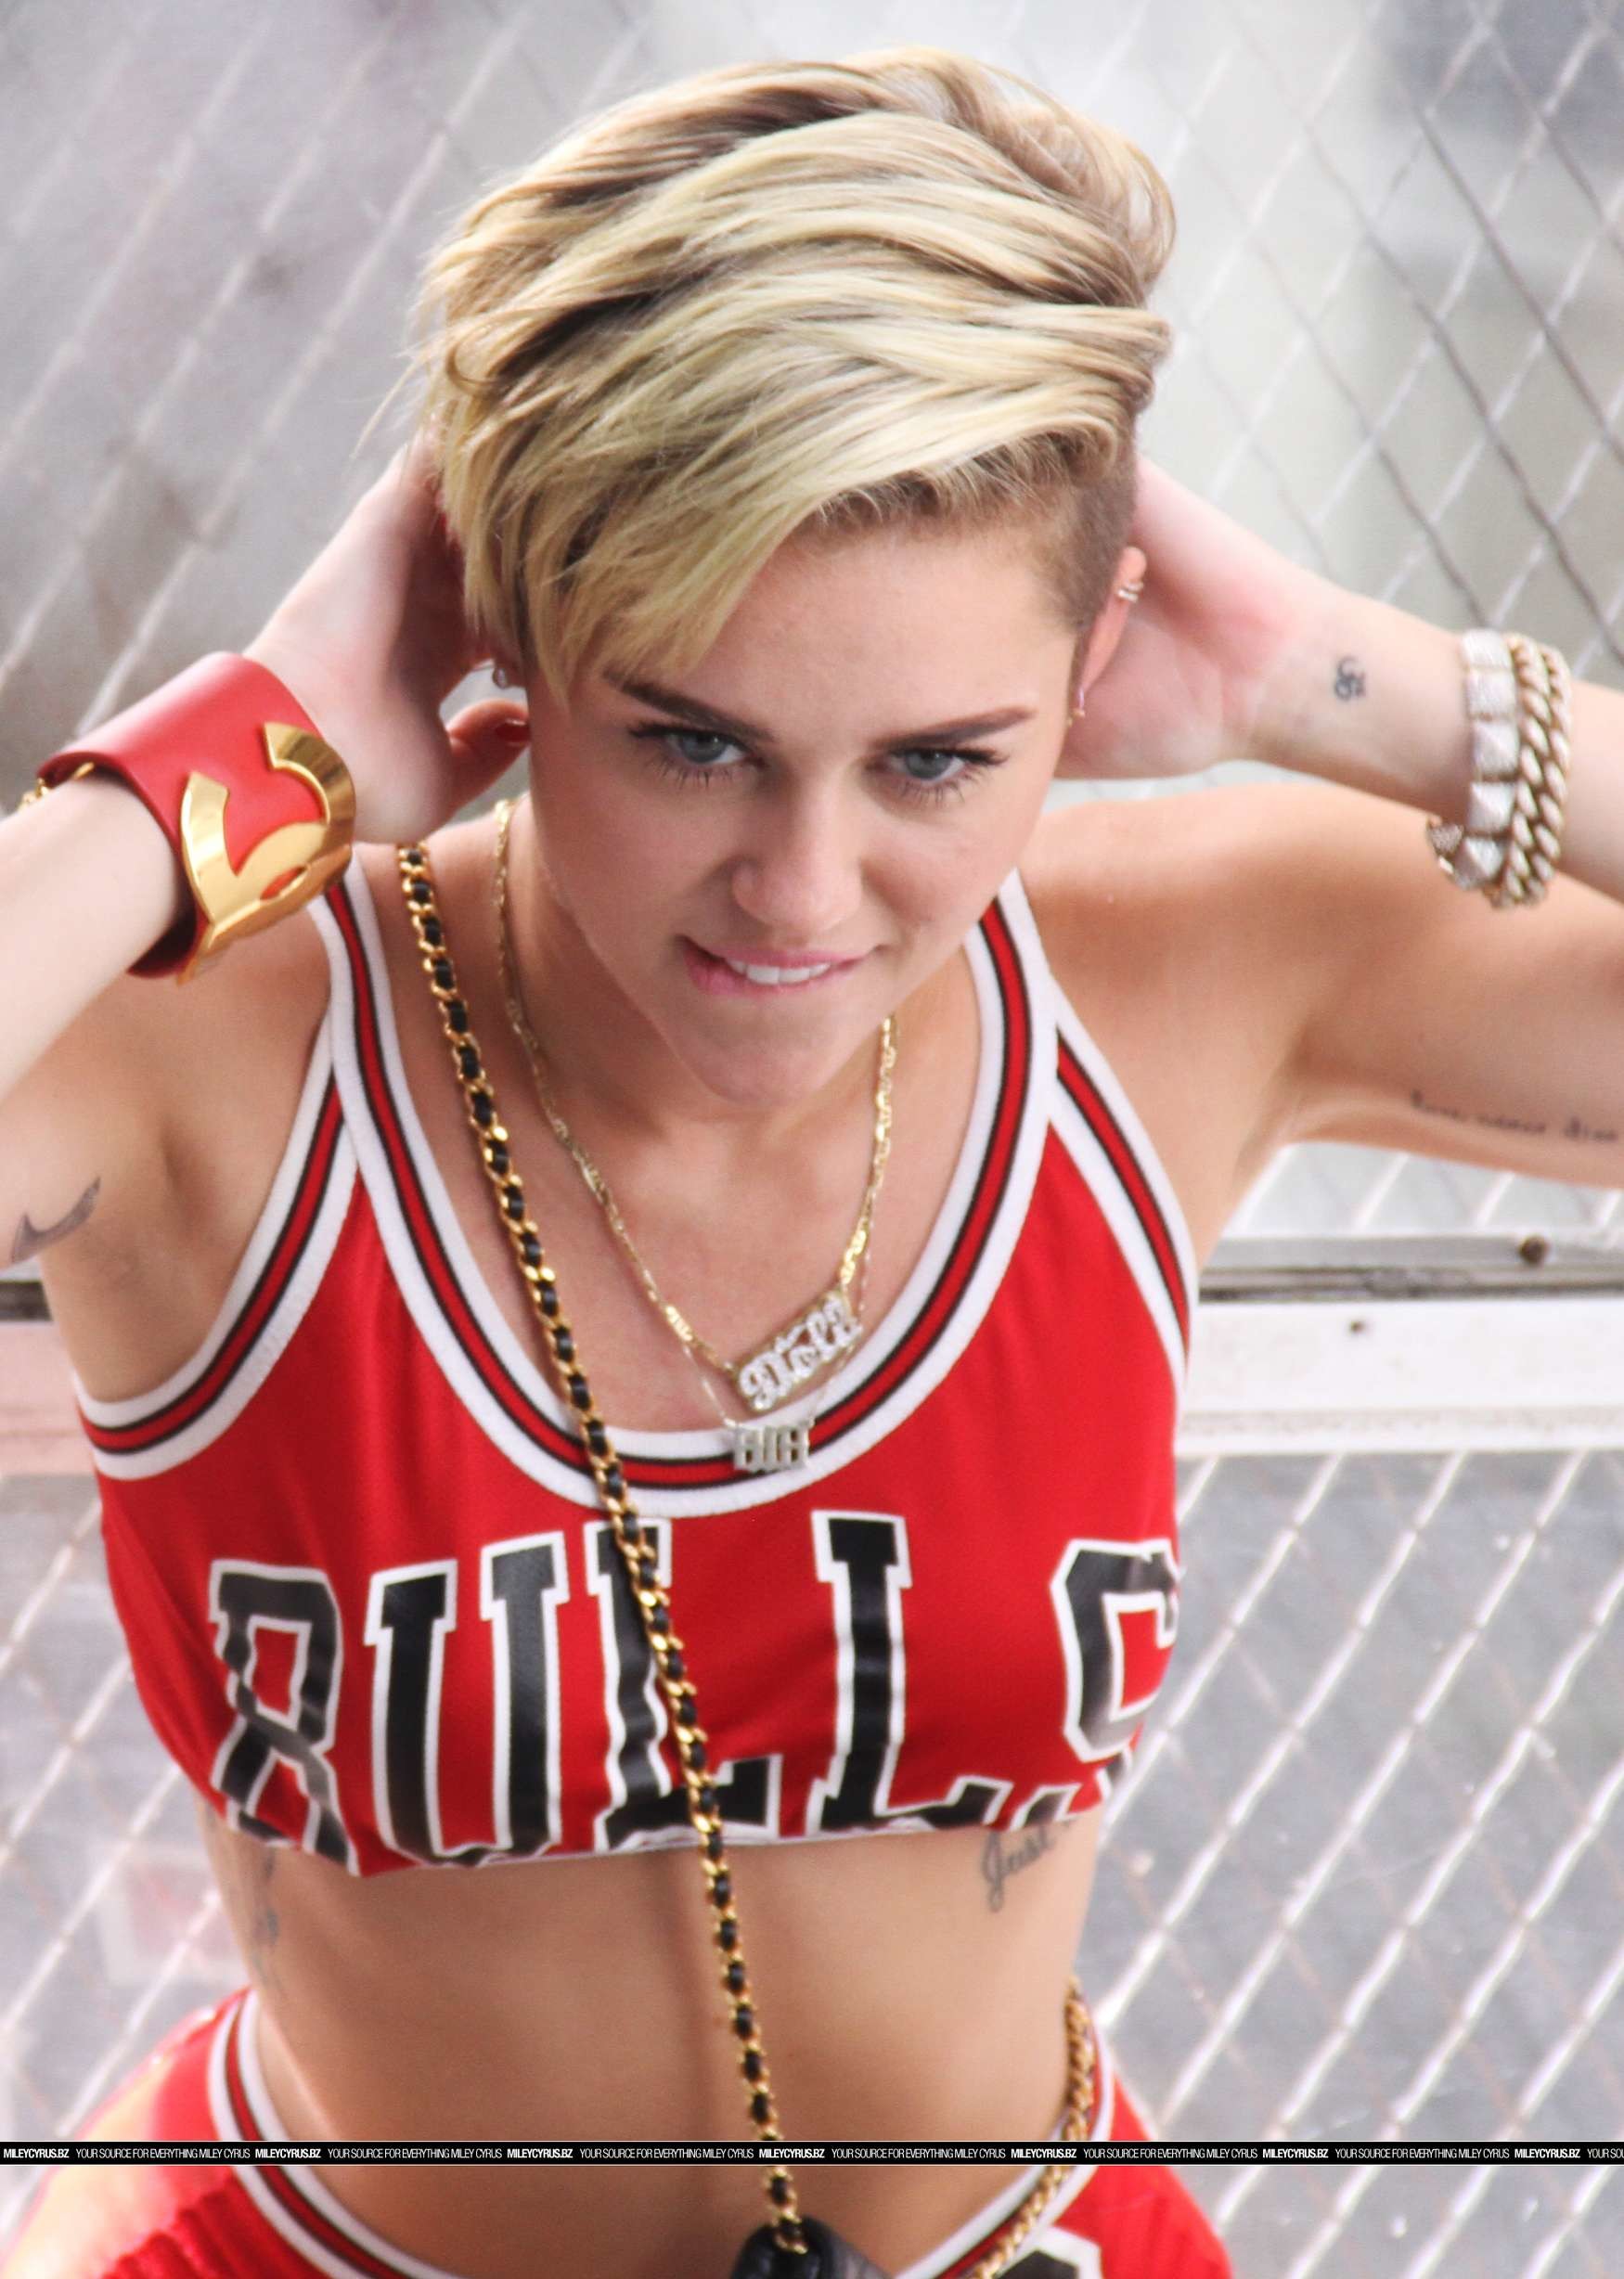 Miley Cyrus – 23 Music Video Portraits -04 – Full Size